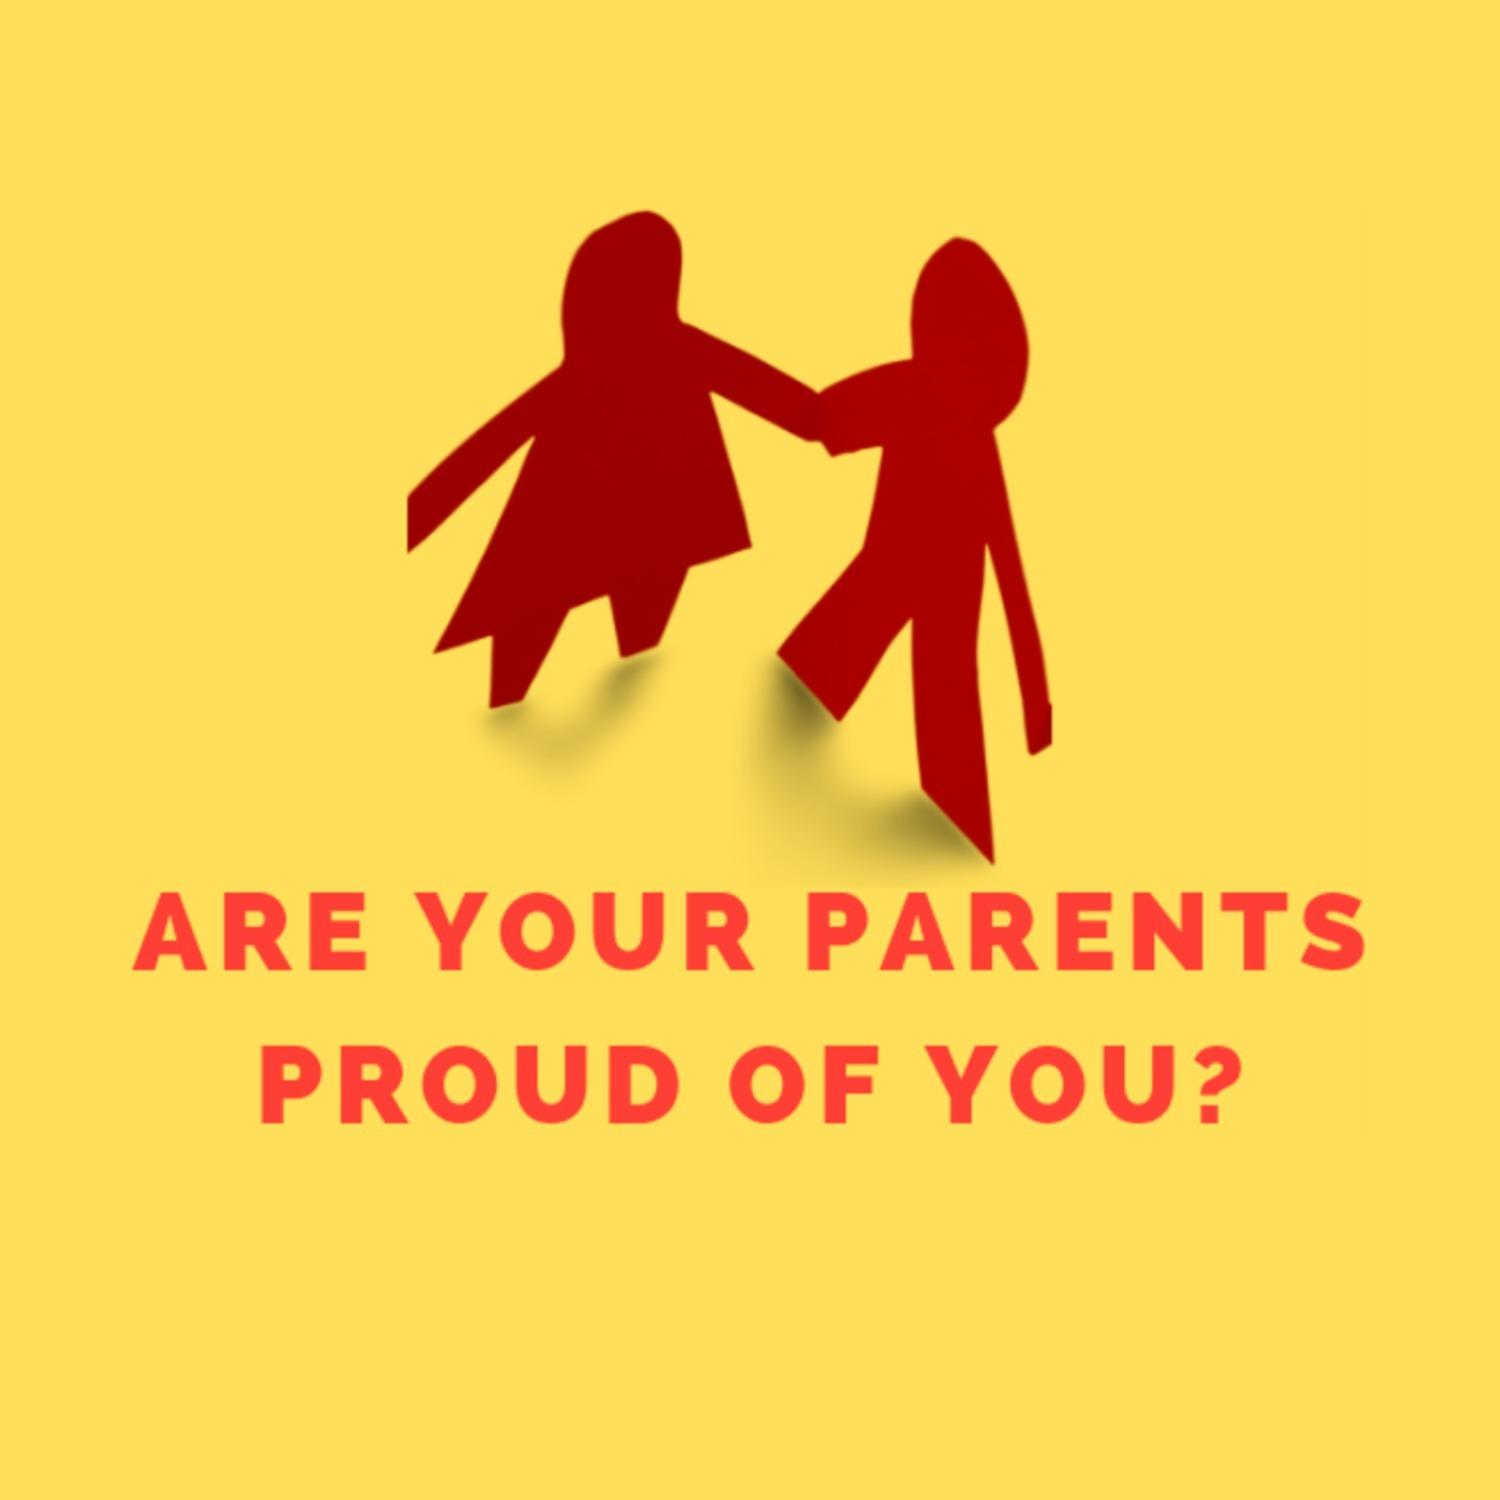 Are Your Parents Proud Of You?